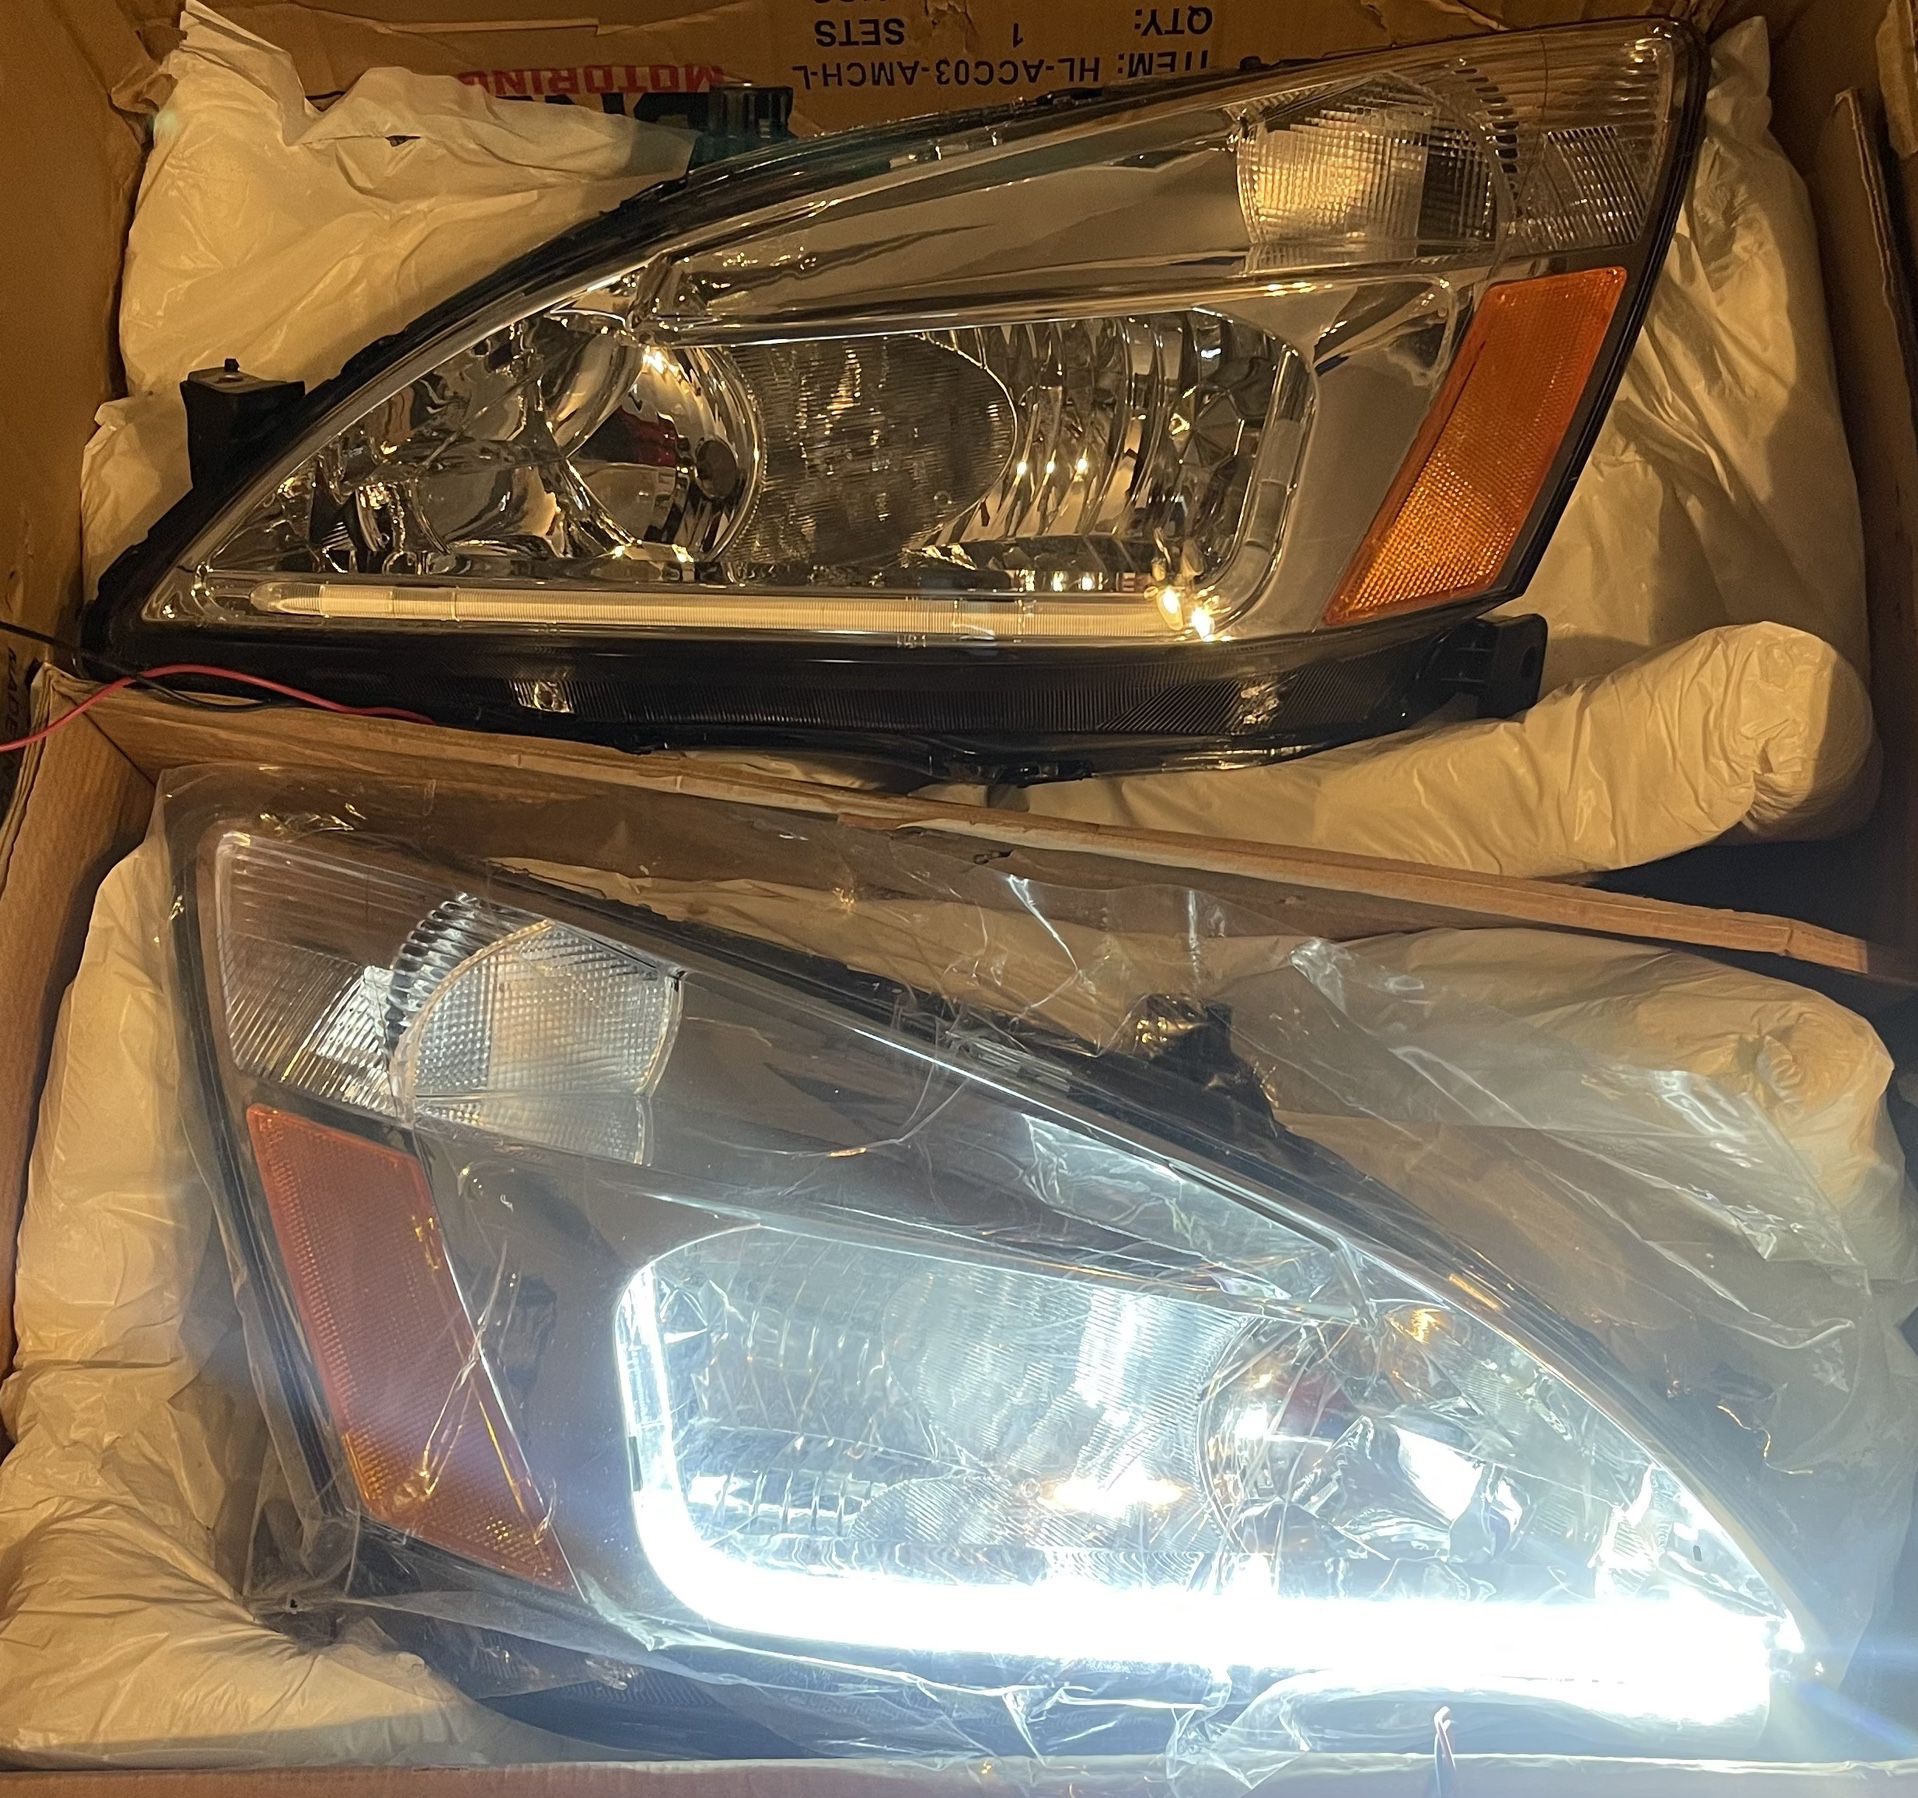 03-07 Honda Accord Chrome Housing And Clear With Amber LED ( Right Side Only Works)  Replacement Pair Headlights Headlamps Luces Farros 